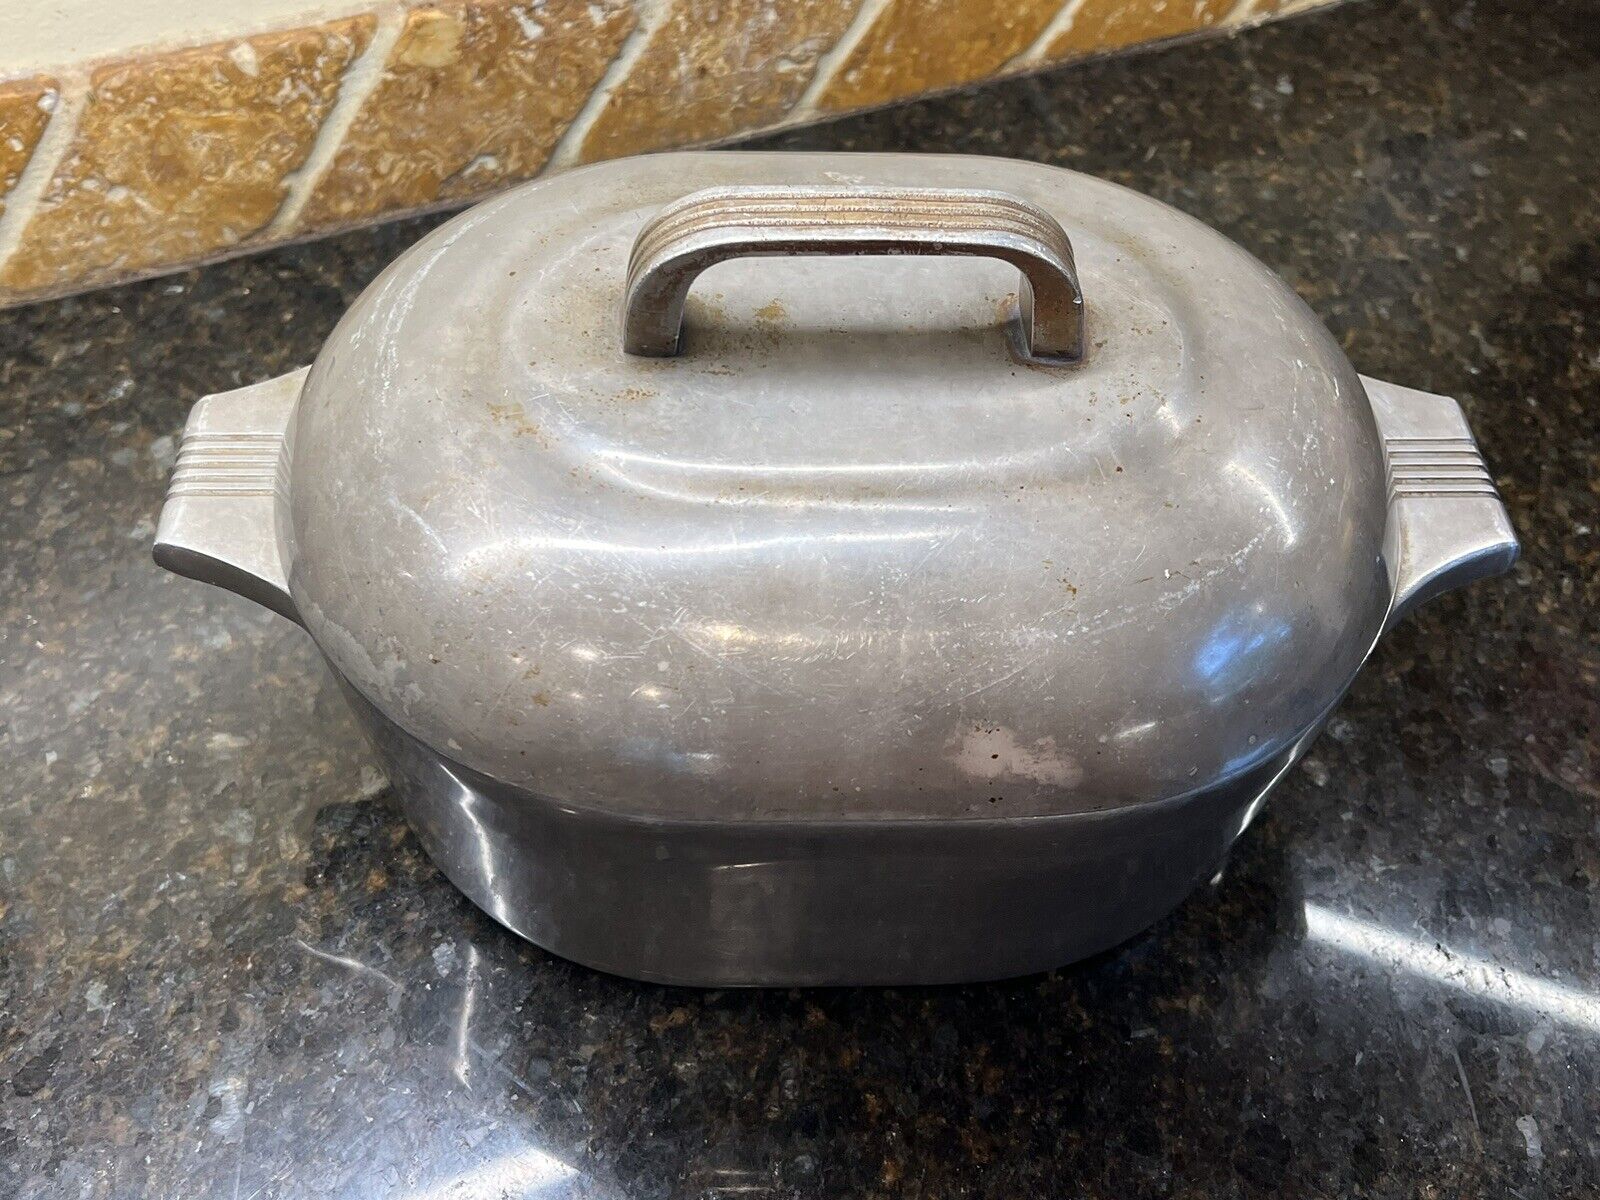 Vintage Magna Lite  Dutch Oven 8 1/2 x 10 1/2 Made In The U.S.A.